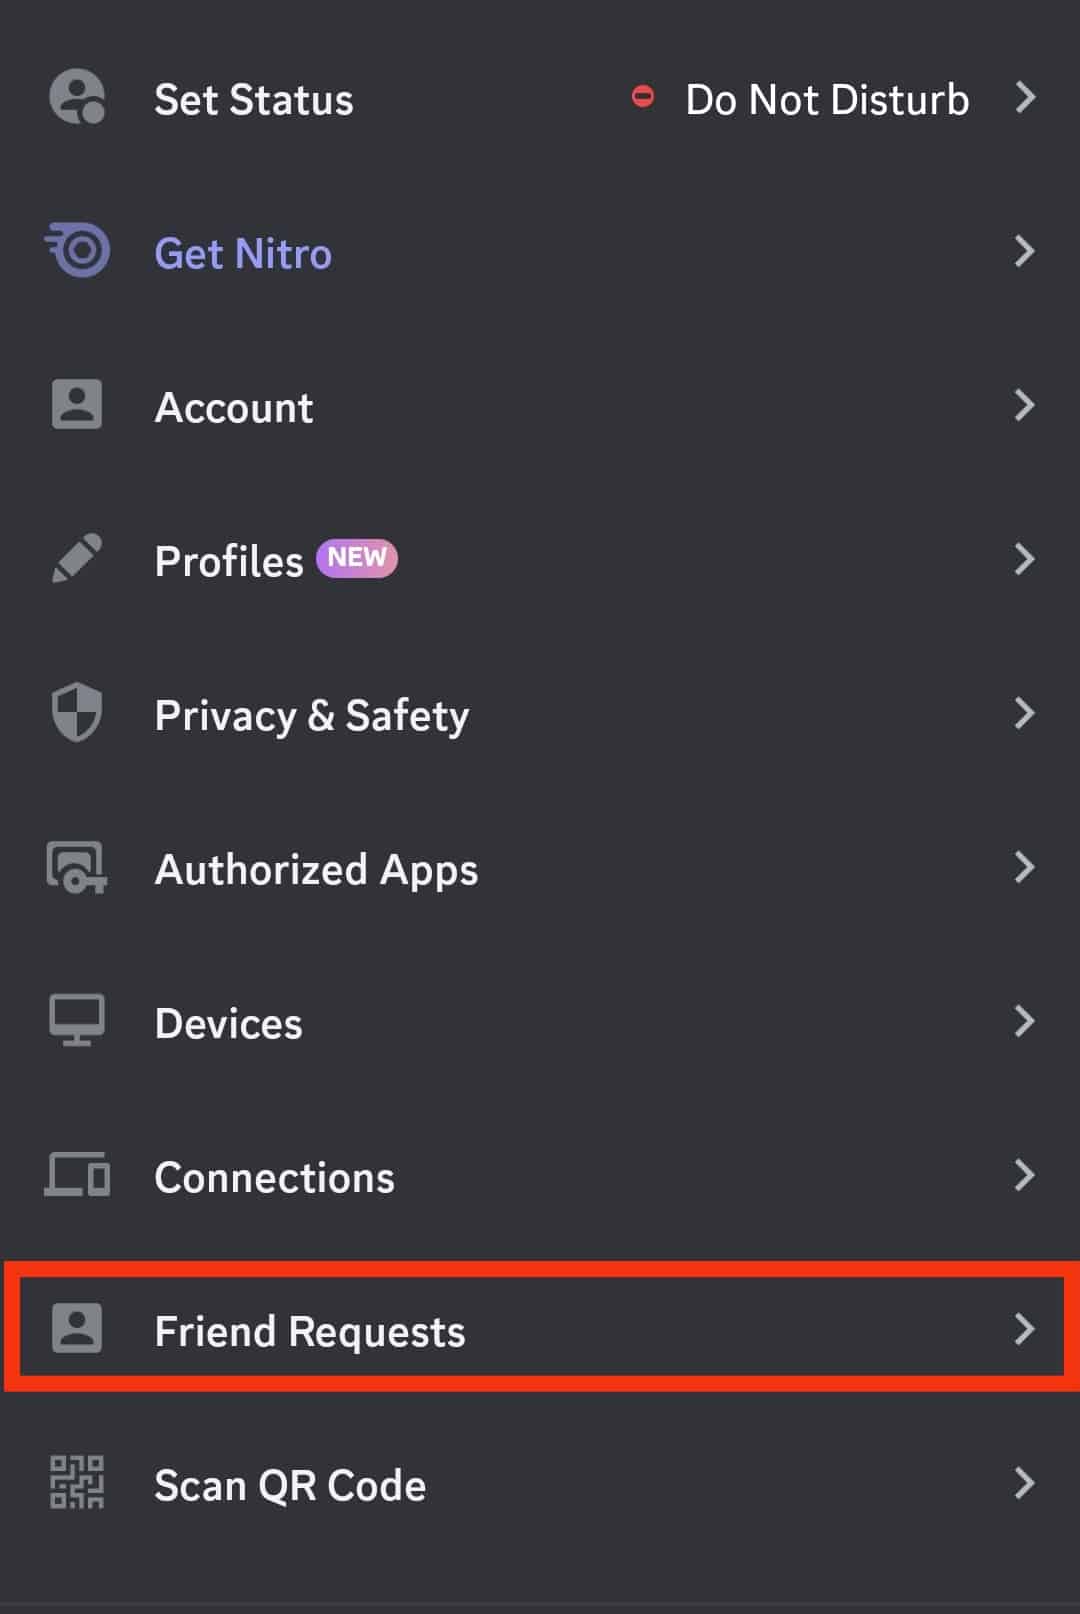 Tap On The 'Friend Request' Option